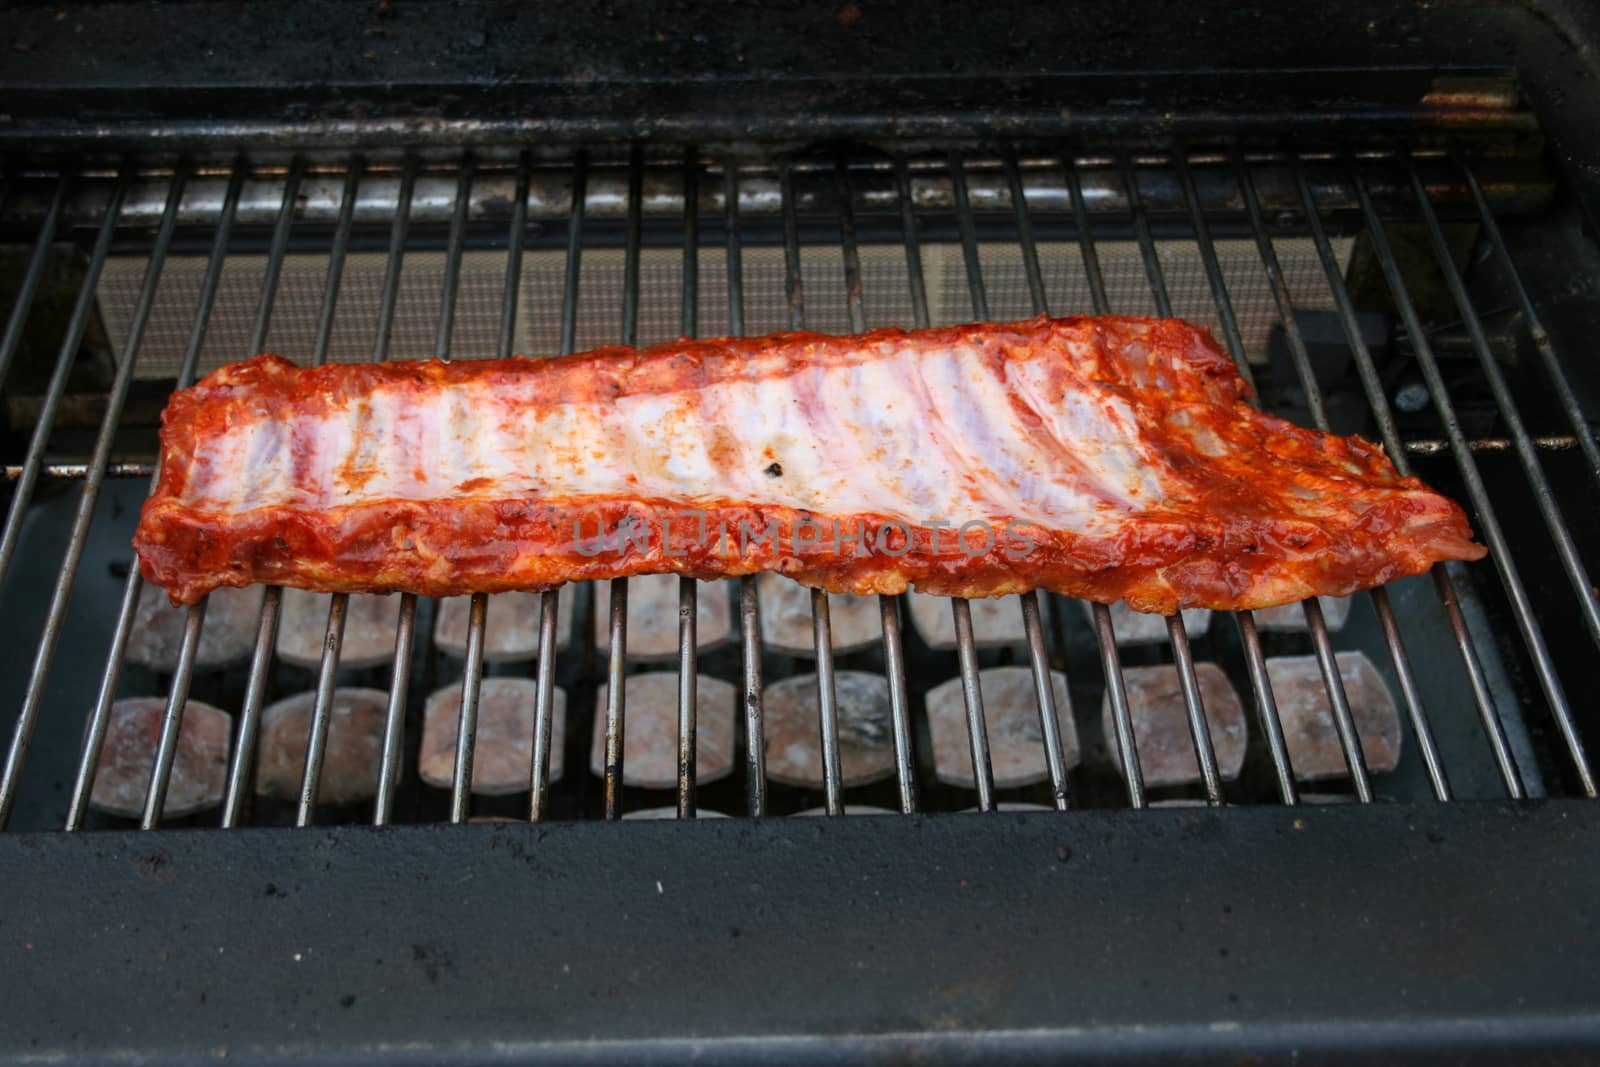 A large still raw piece of meat on a gas grill